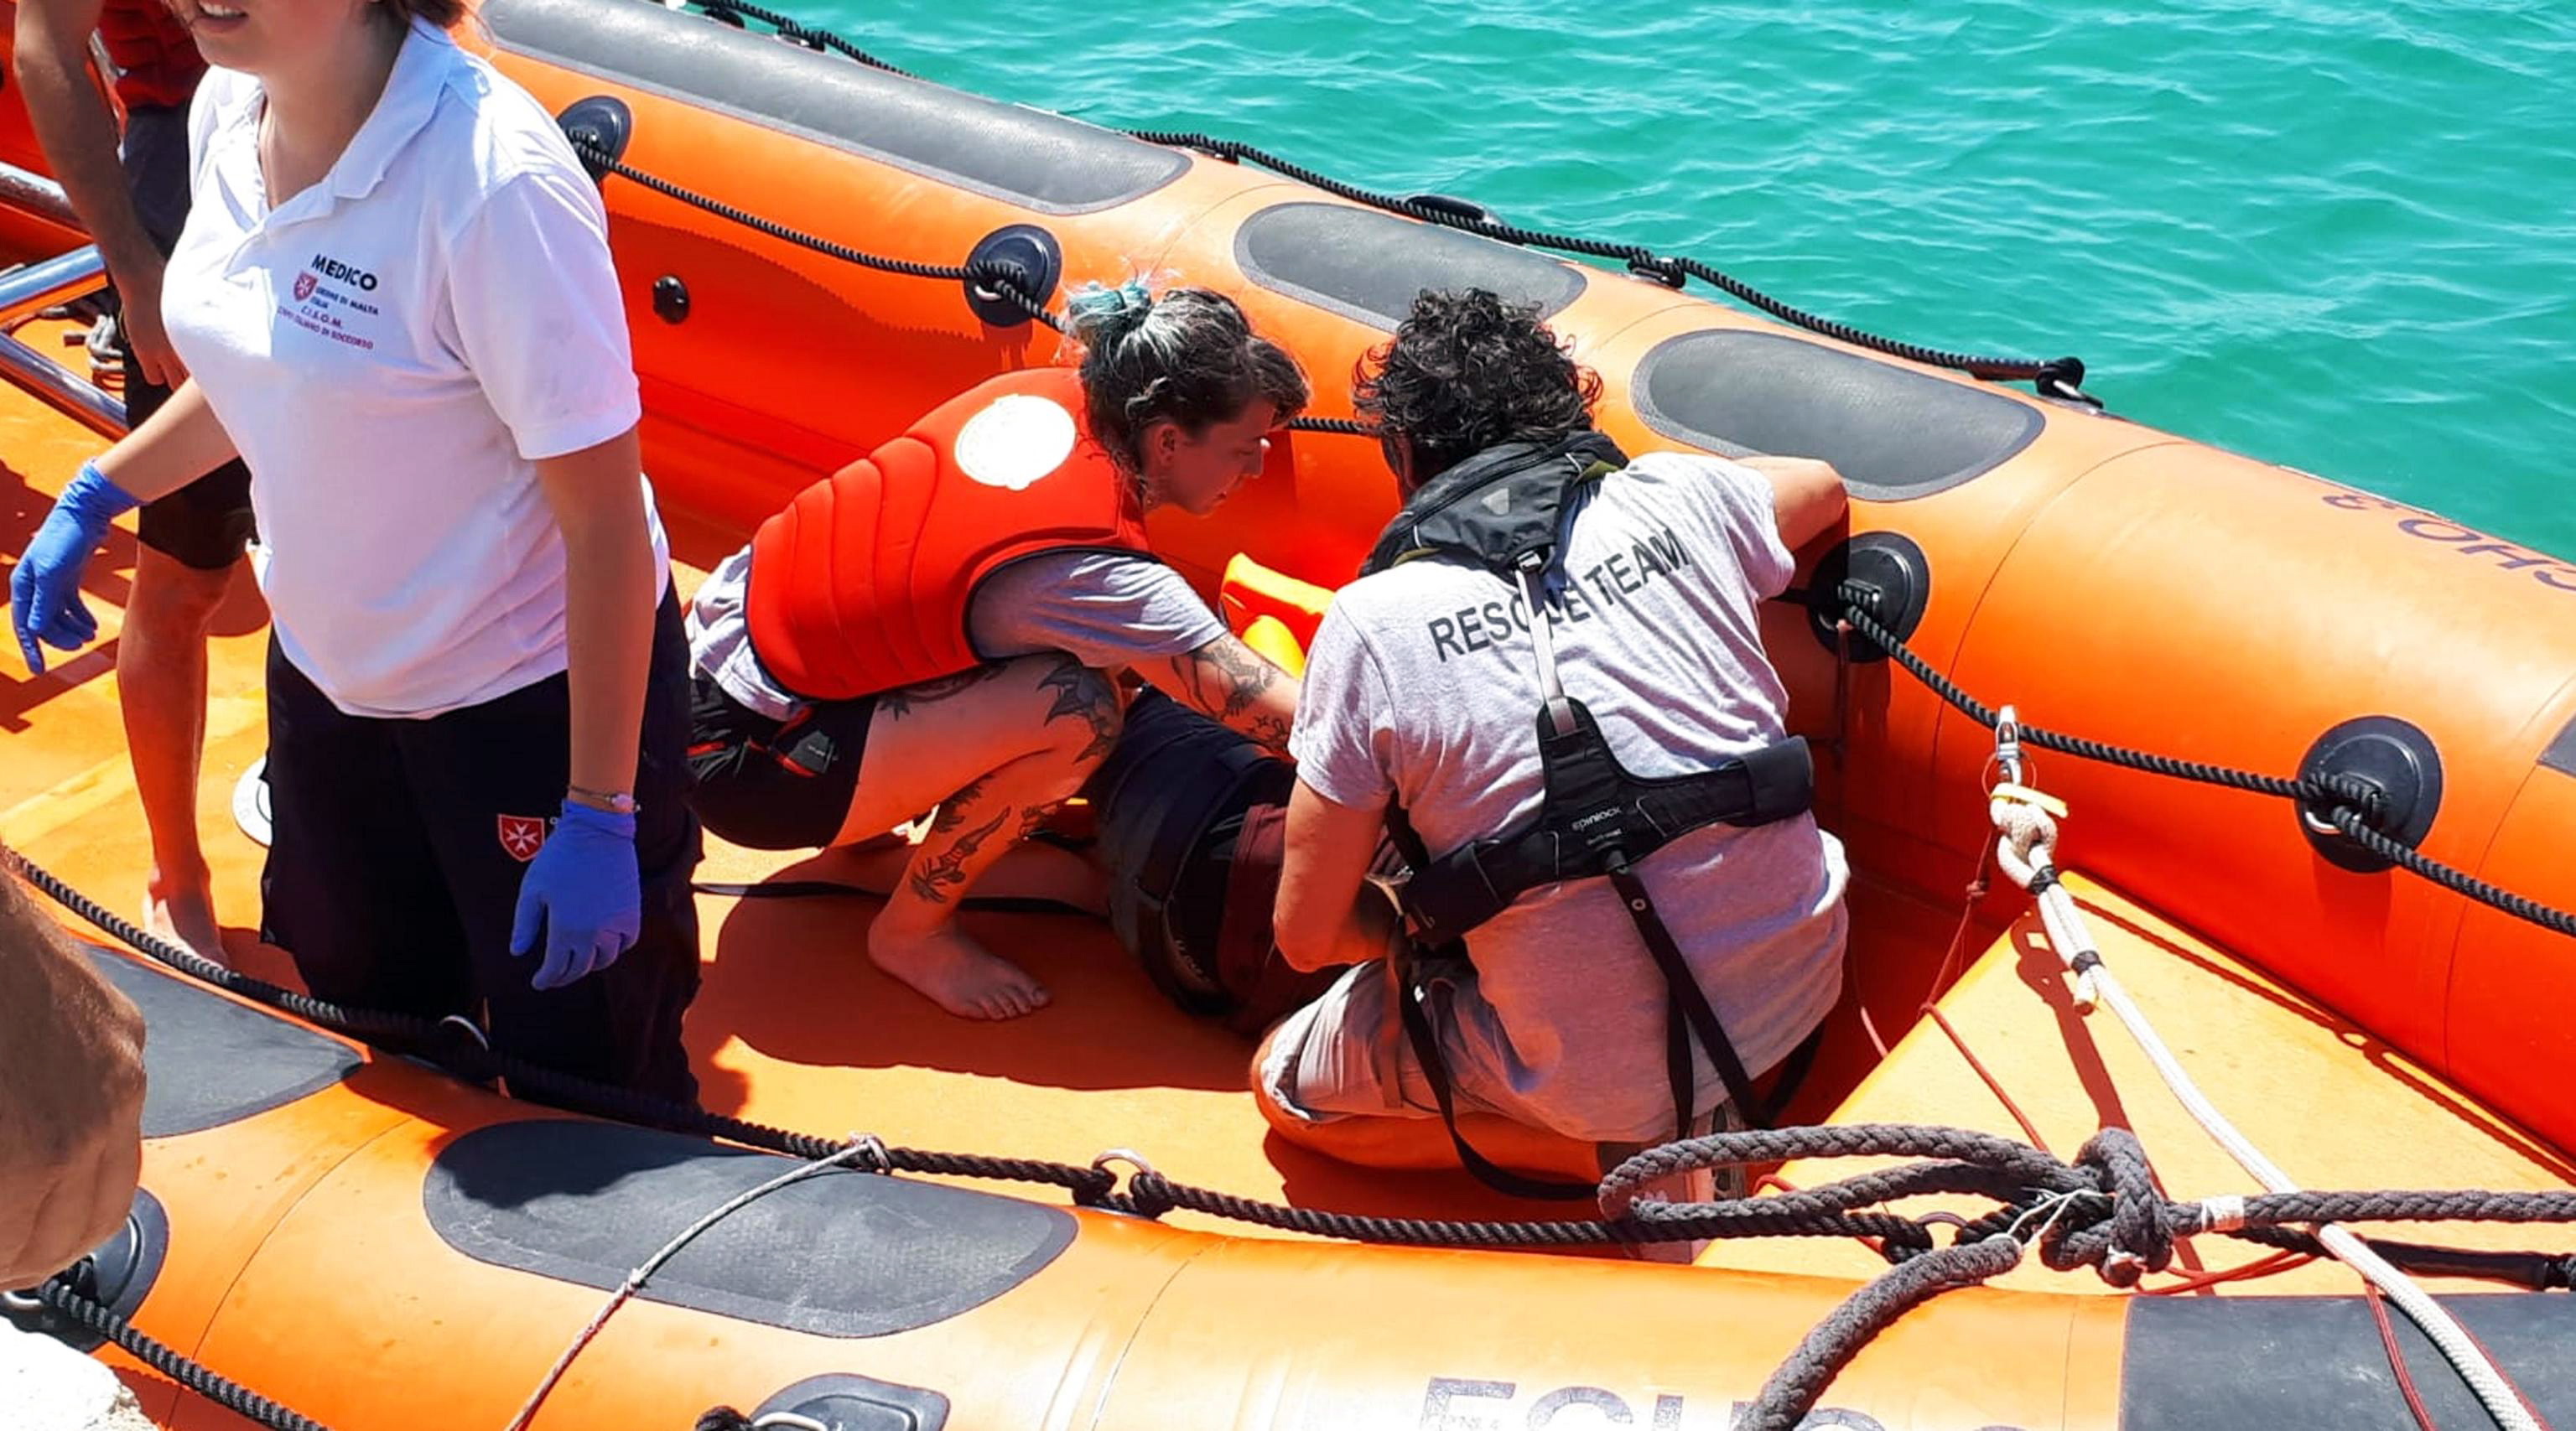 epa07782069 Rescuers give first-aid to some of the migrants, who reportedly dived into the sea from the Spanish NGO rescue ship Open Arms in an attempt to swim to the coast, in Lampedusa, southern Italy, 20 August 2019. Some migrants reportedly dived into the sea from the Spanish NGO rescue vessel Open Arms in an attempt to swim and reach the coast. The rescue boat is anchored about 800 meters off the rocks of Lampedusa Island. The men were recovered by an Italian Coast Guard patrol boat.  EPA/ALFREDO PECORARO